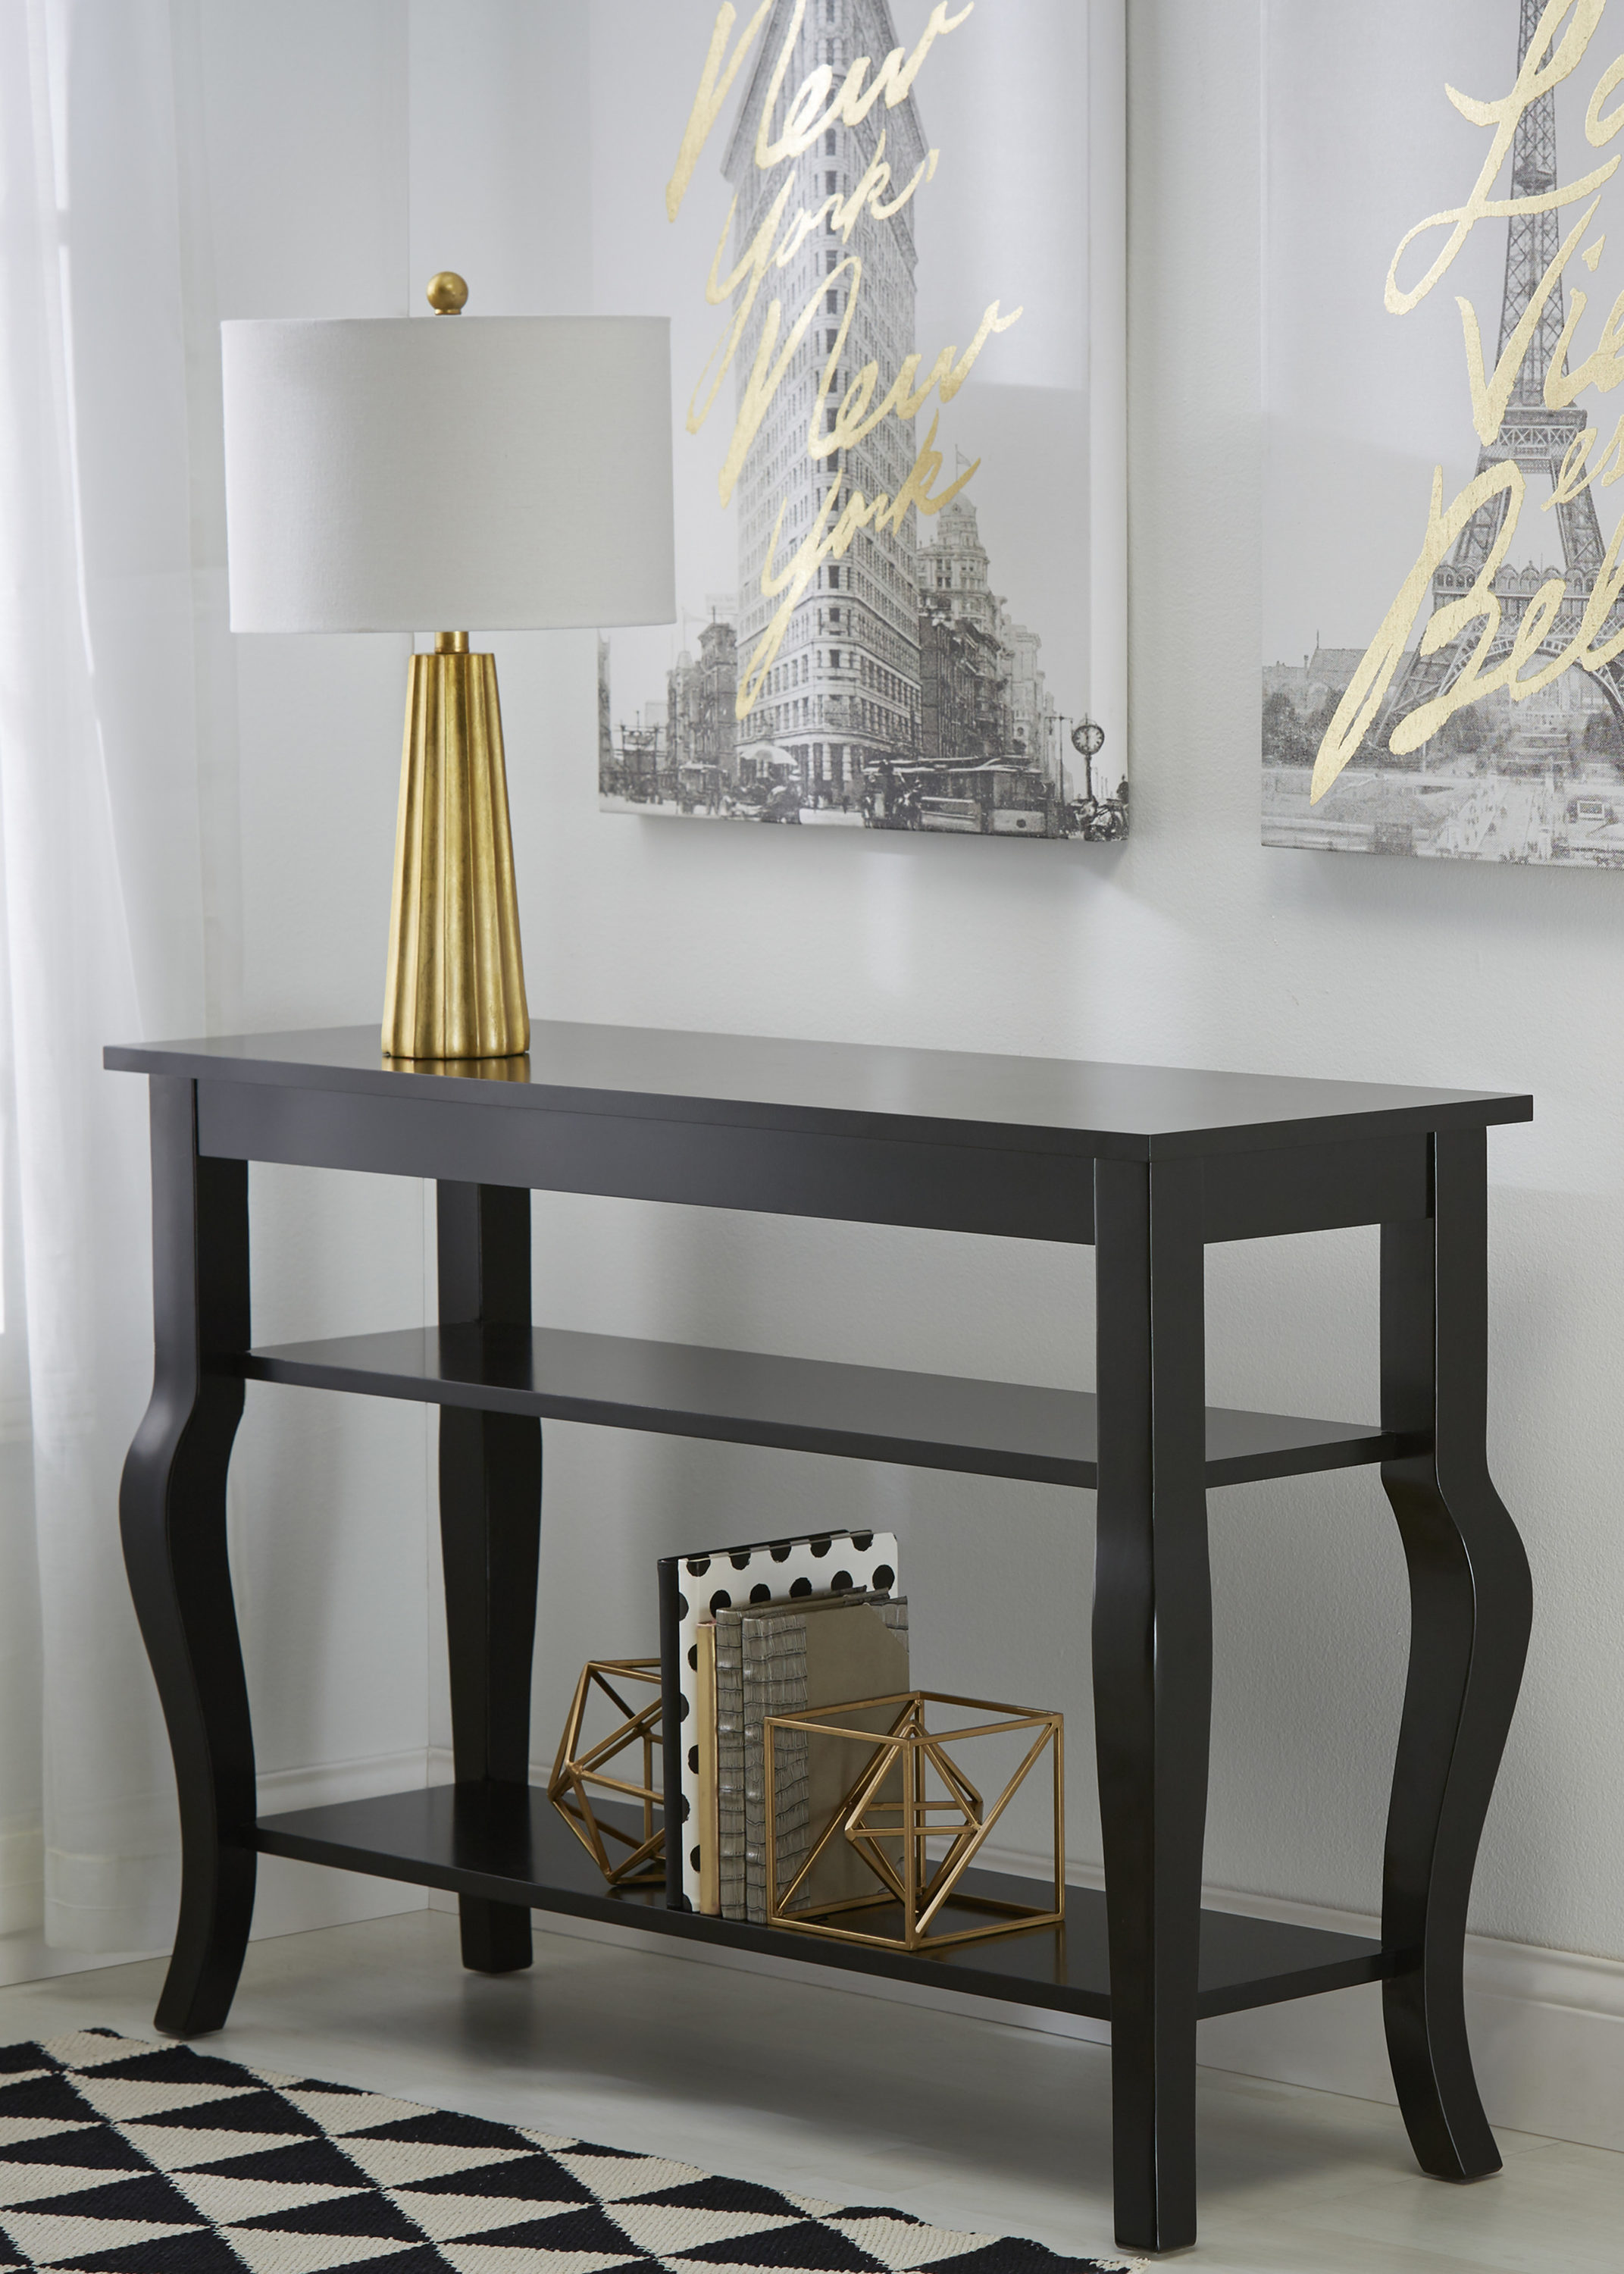 Black Kate and Laurel Lillian Wood Half Moon Console Table Curved Legs with Shelf